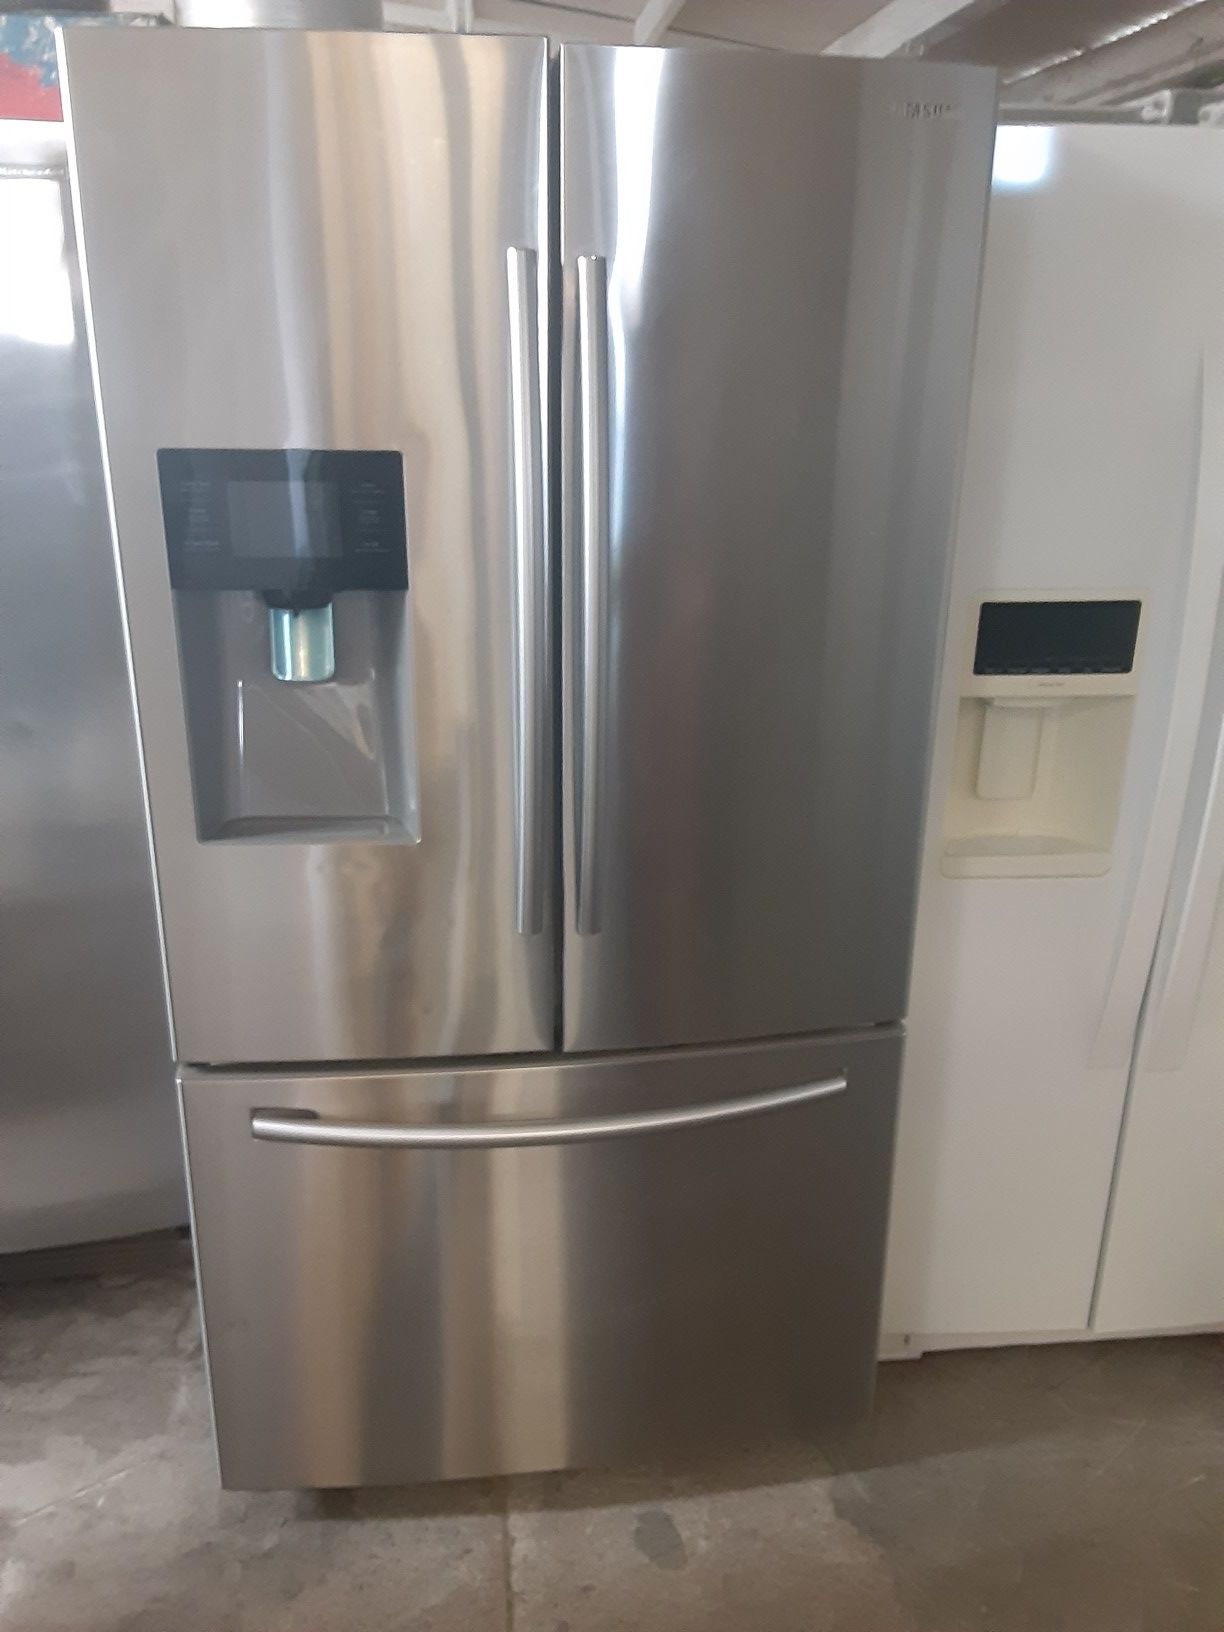 Refrigerator Samsung good condition 3 months warranty delivery and install